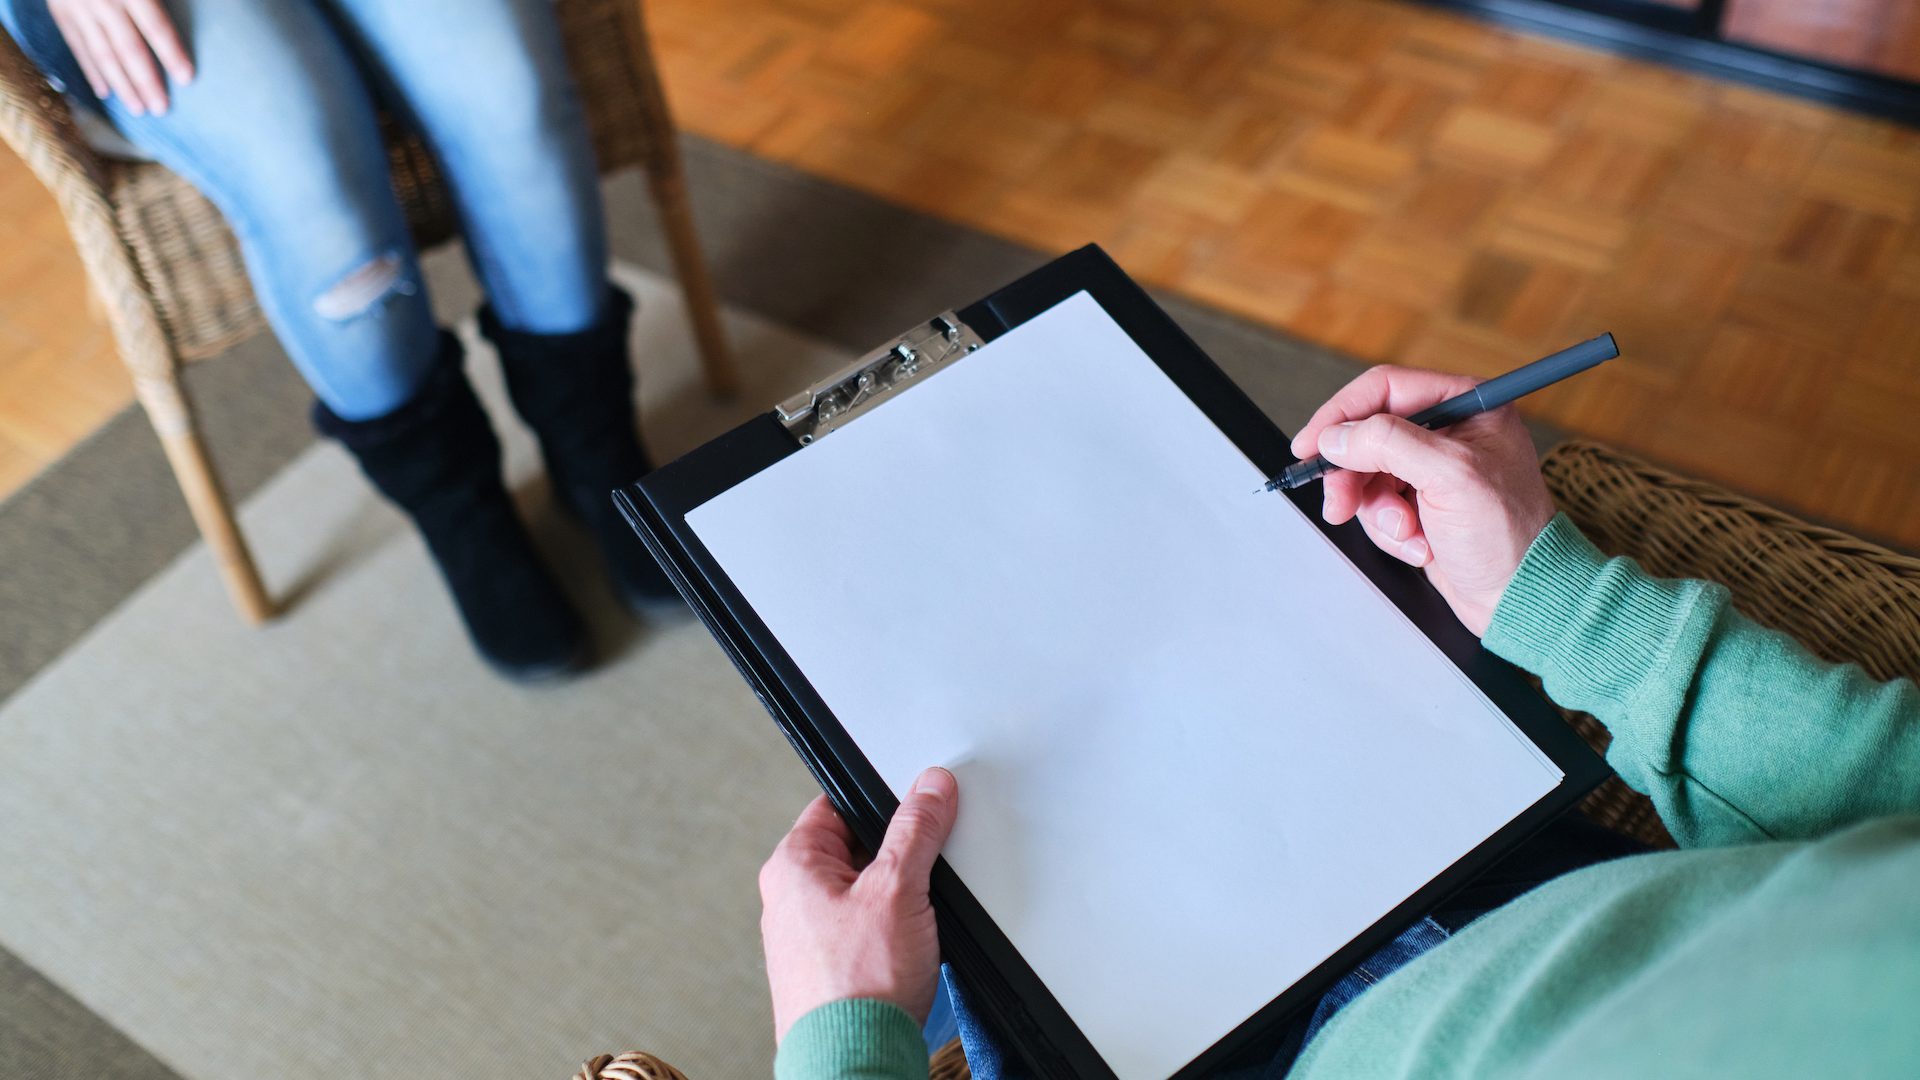 Close-up of therapist hand writing notes during a counseling session with a single woman sitting on a couch in the blurred background.enneagram of personality - nine distinct types